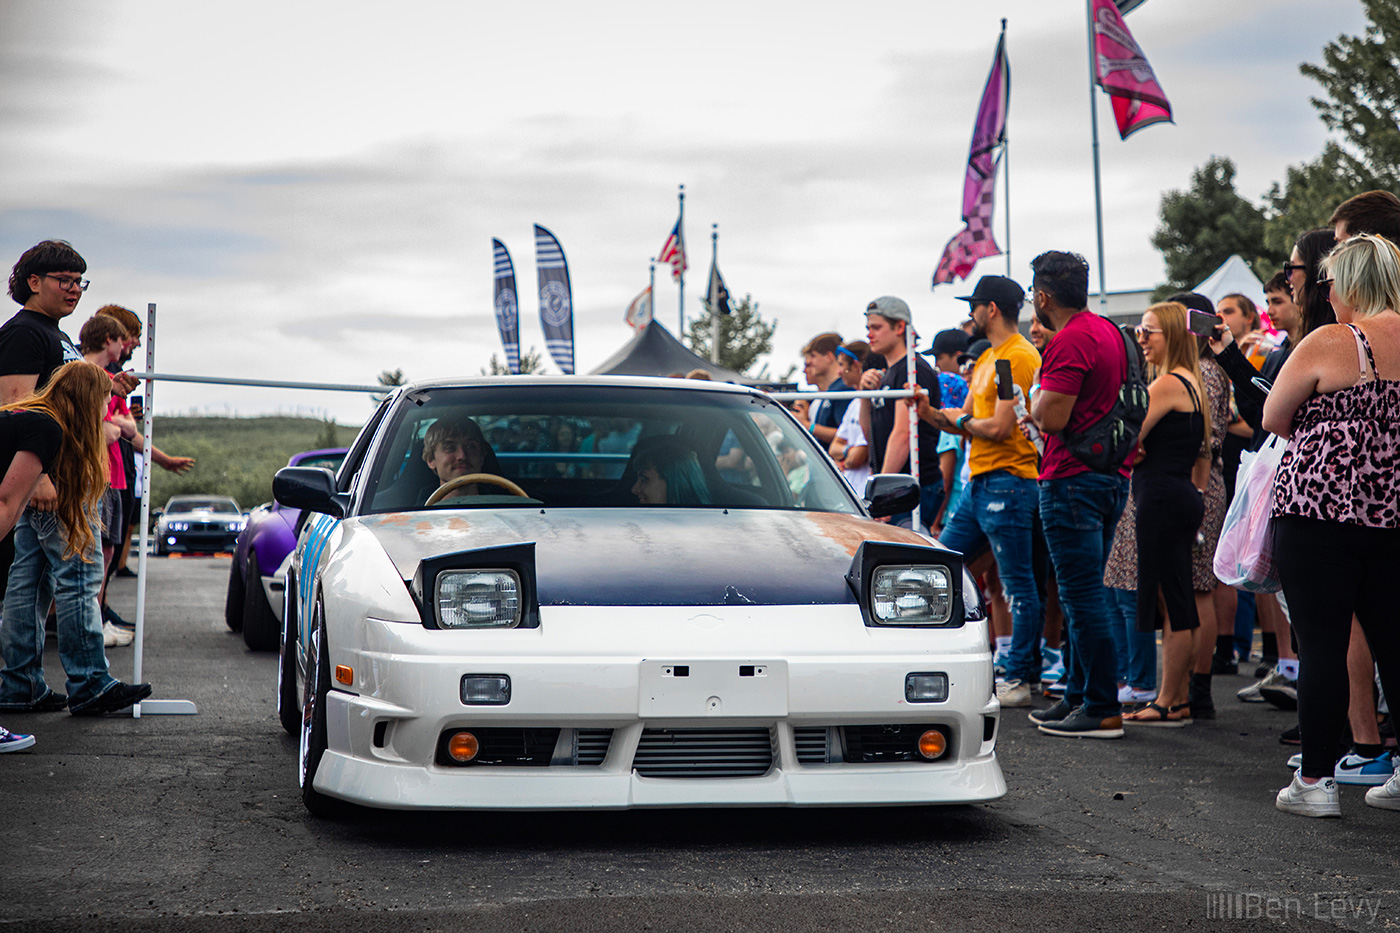 Mike Prizza doing low car limbo in his white S13